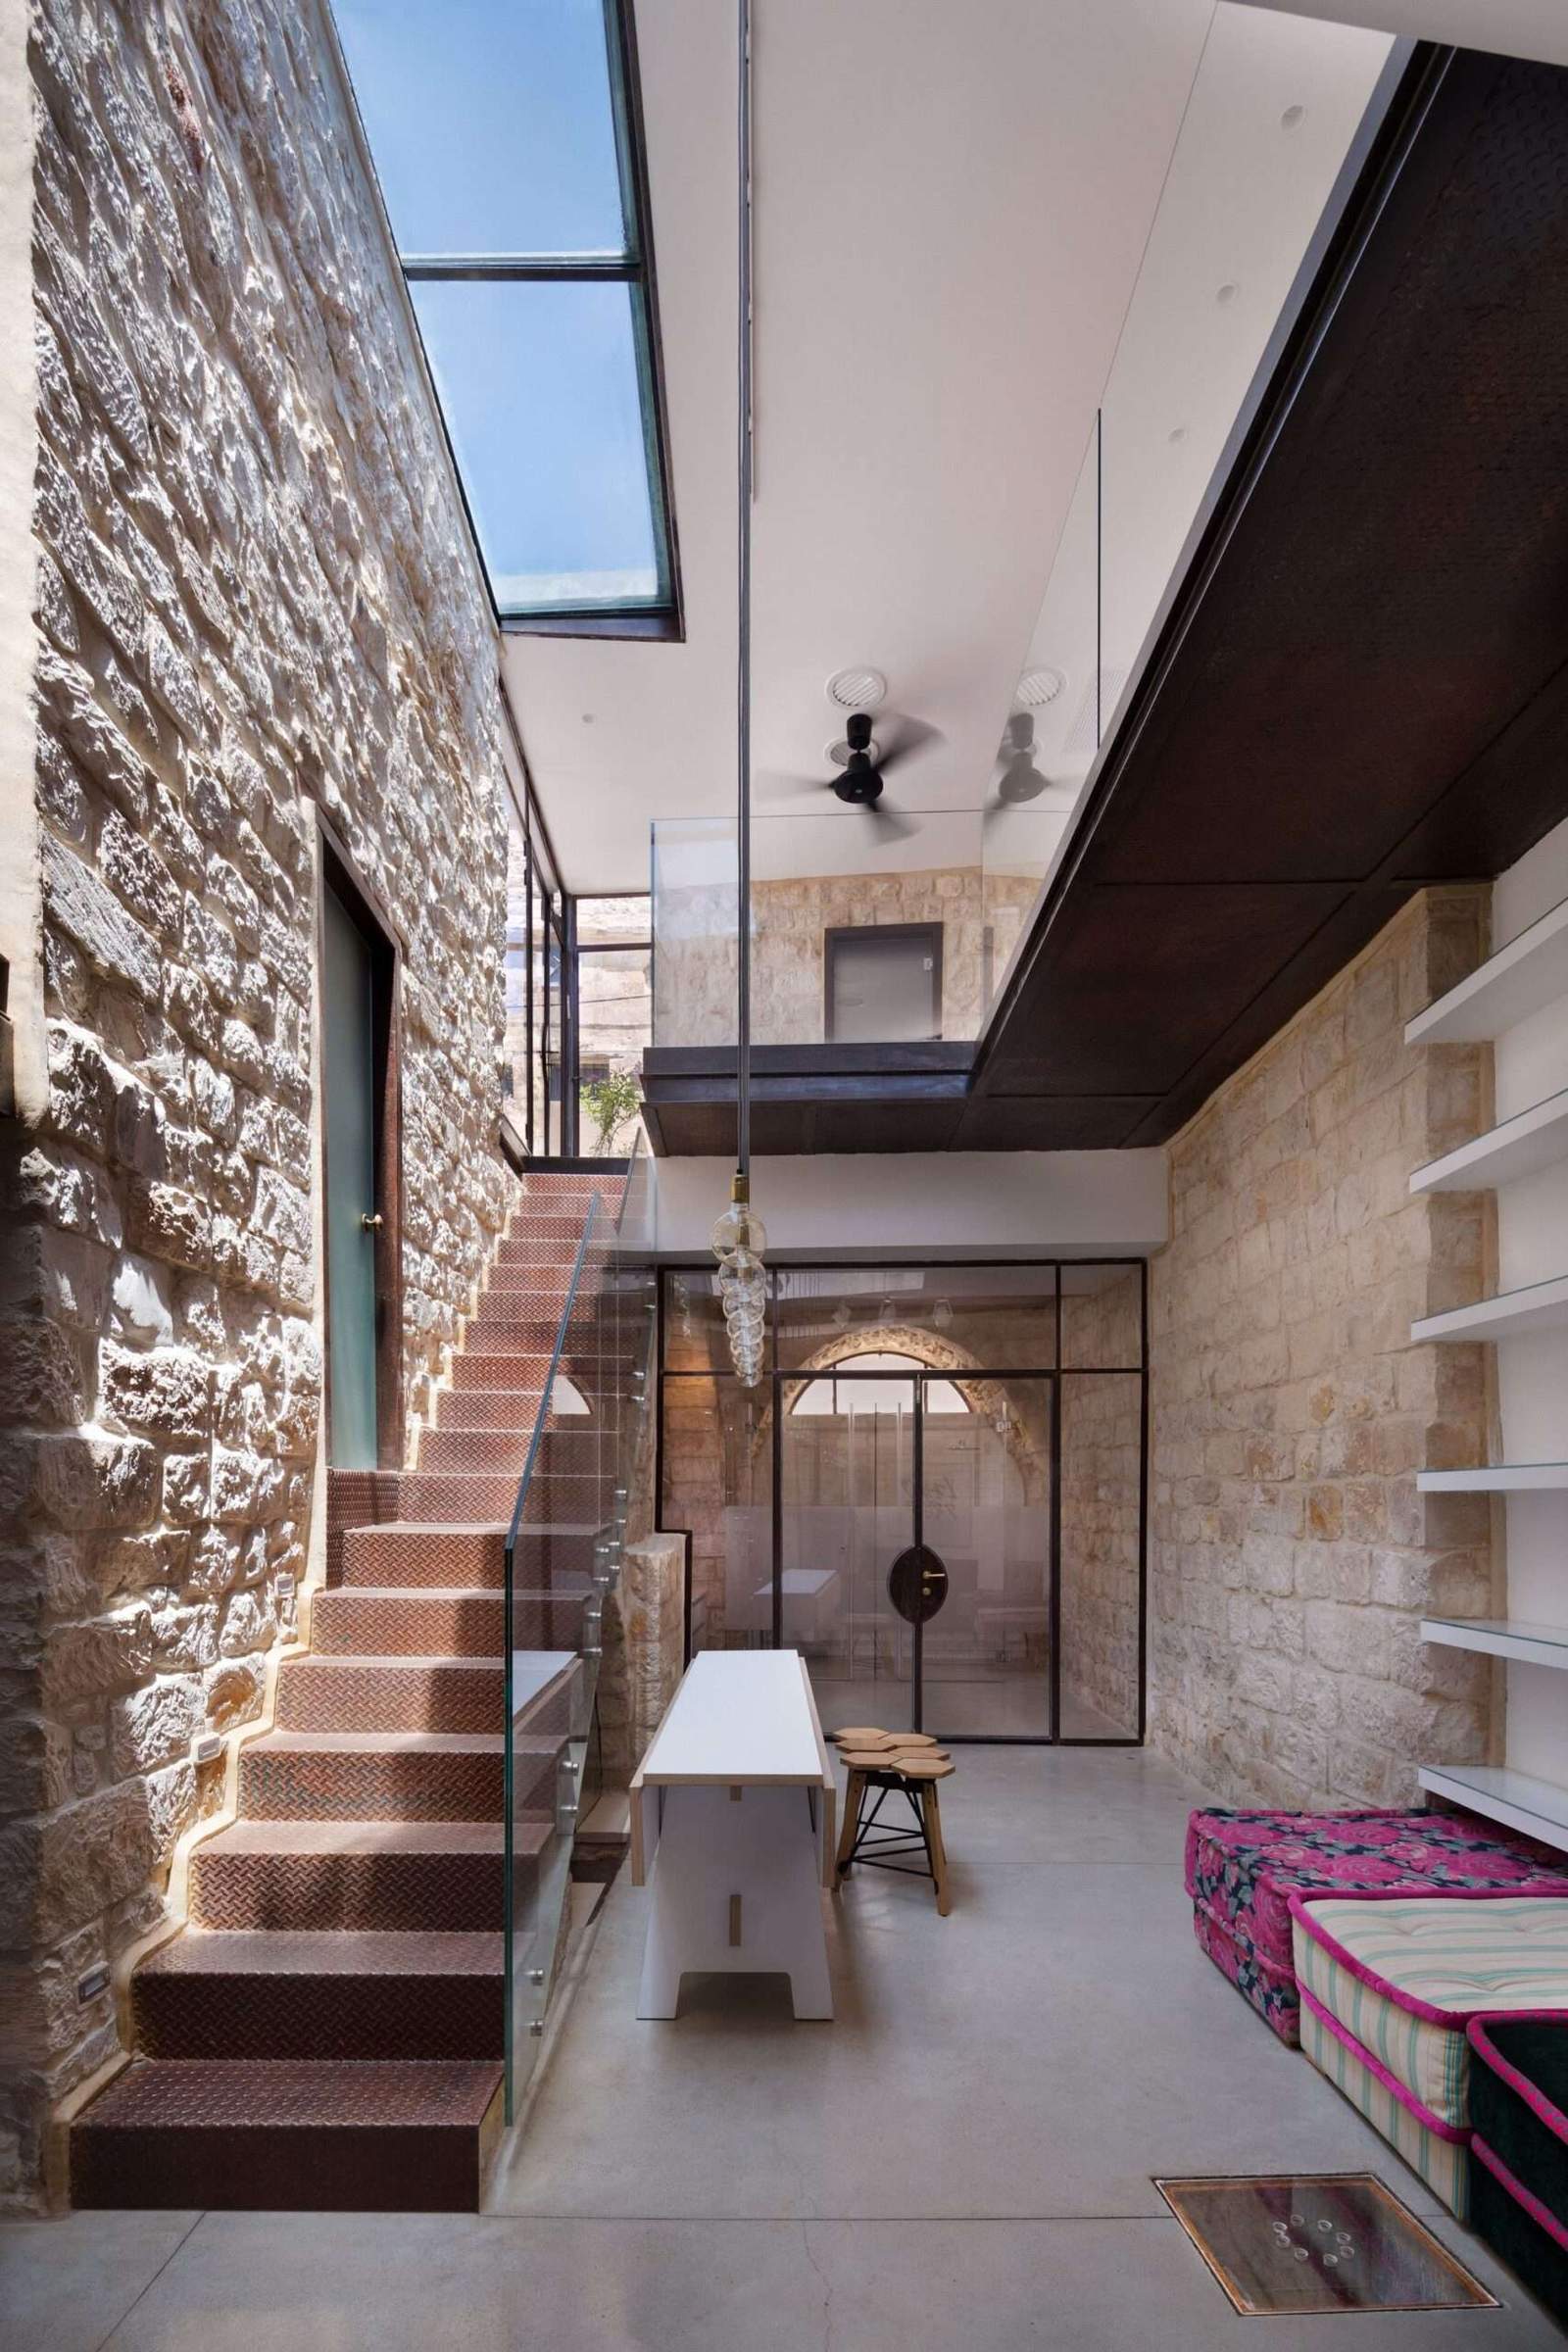 Built by HENKIN SHAVIT Architecture & Design in Safed, Israel with date 2015. Images…